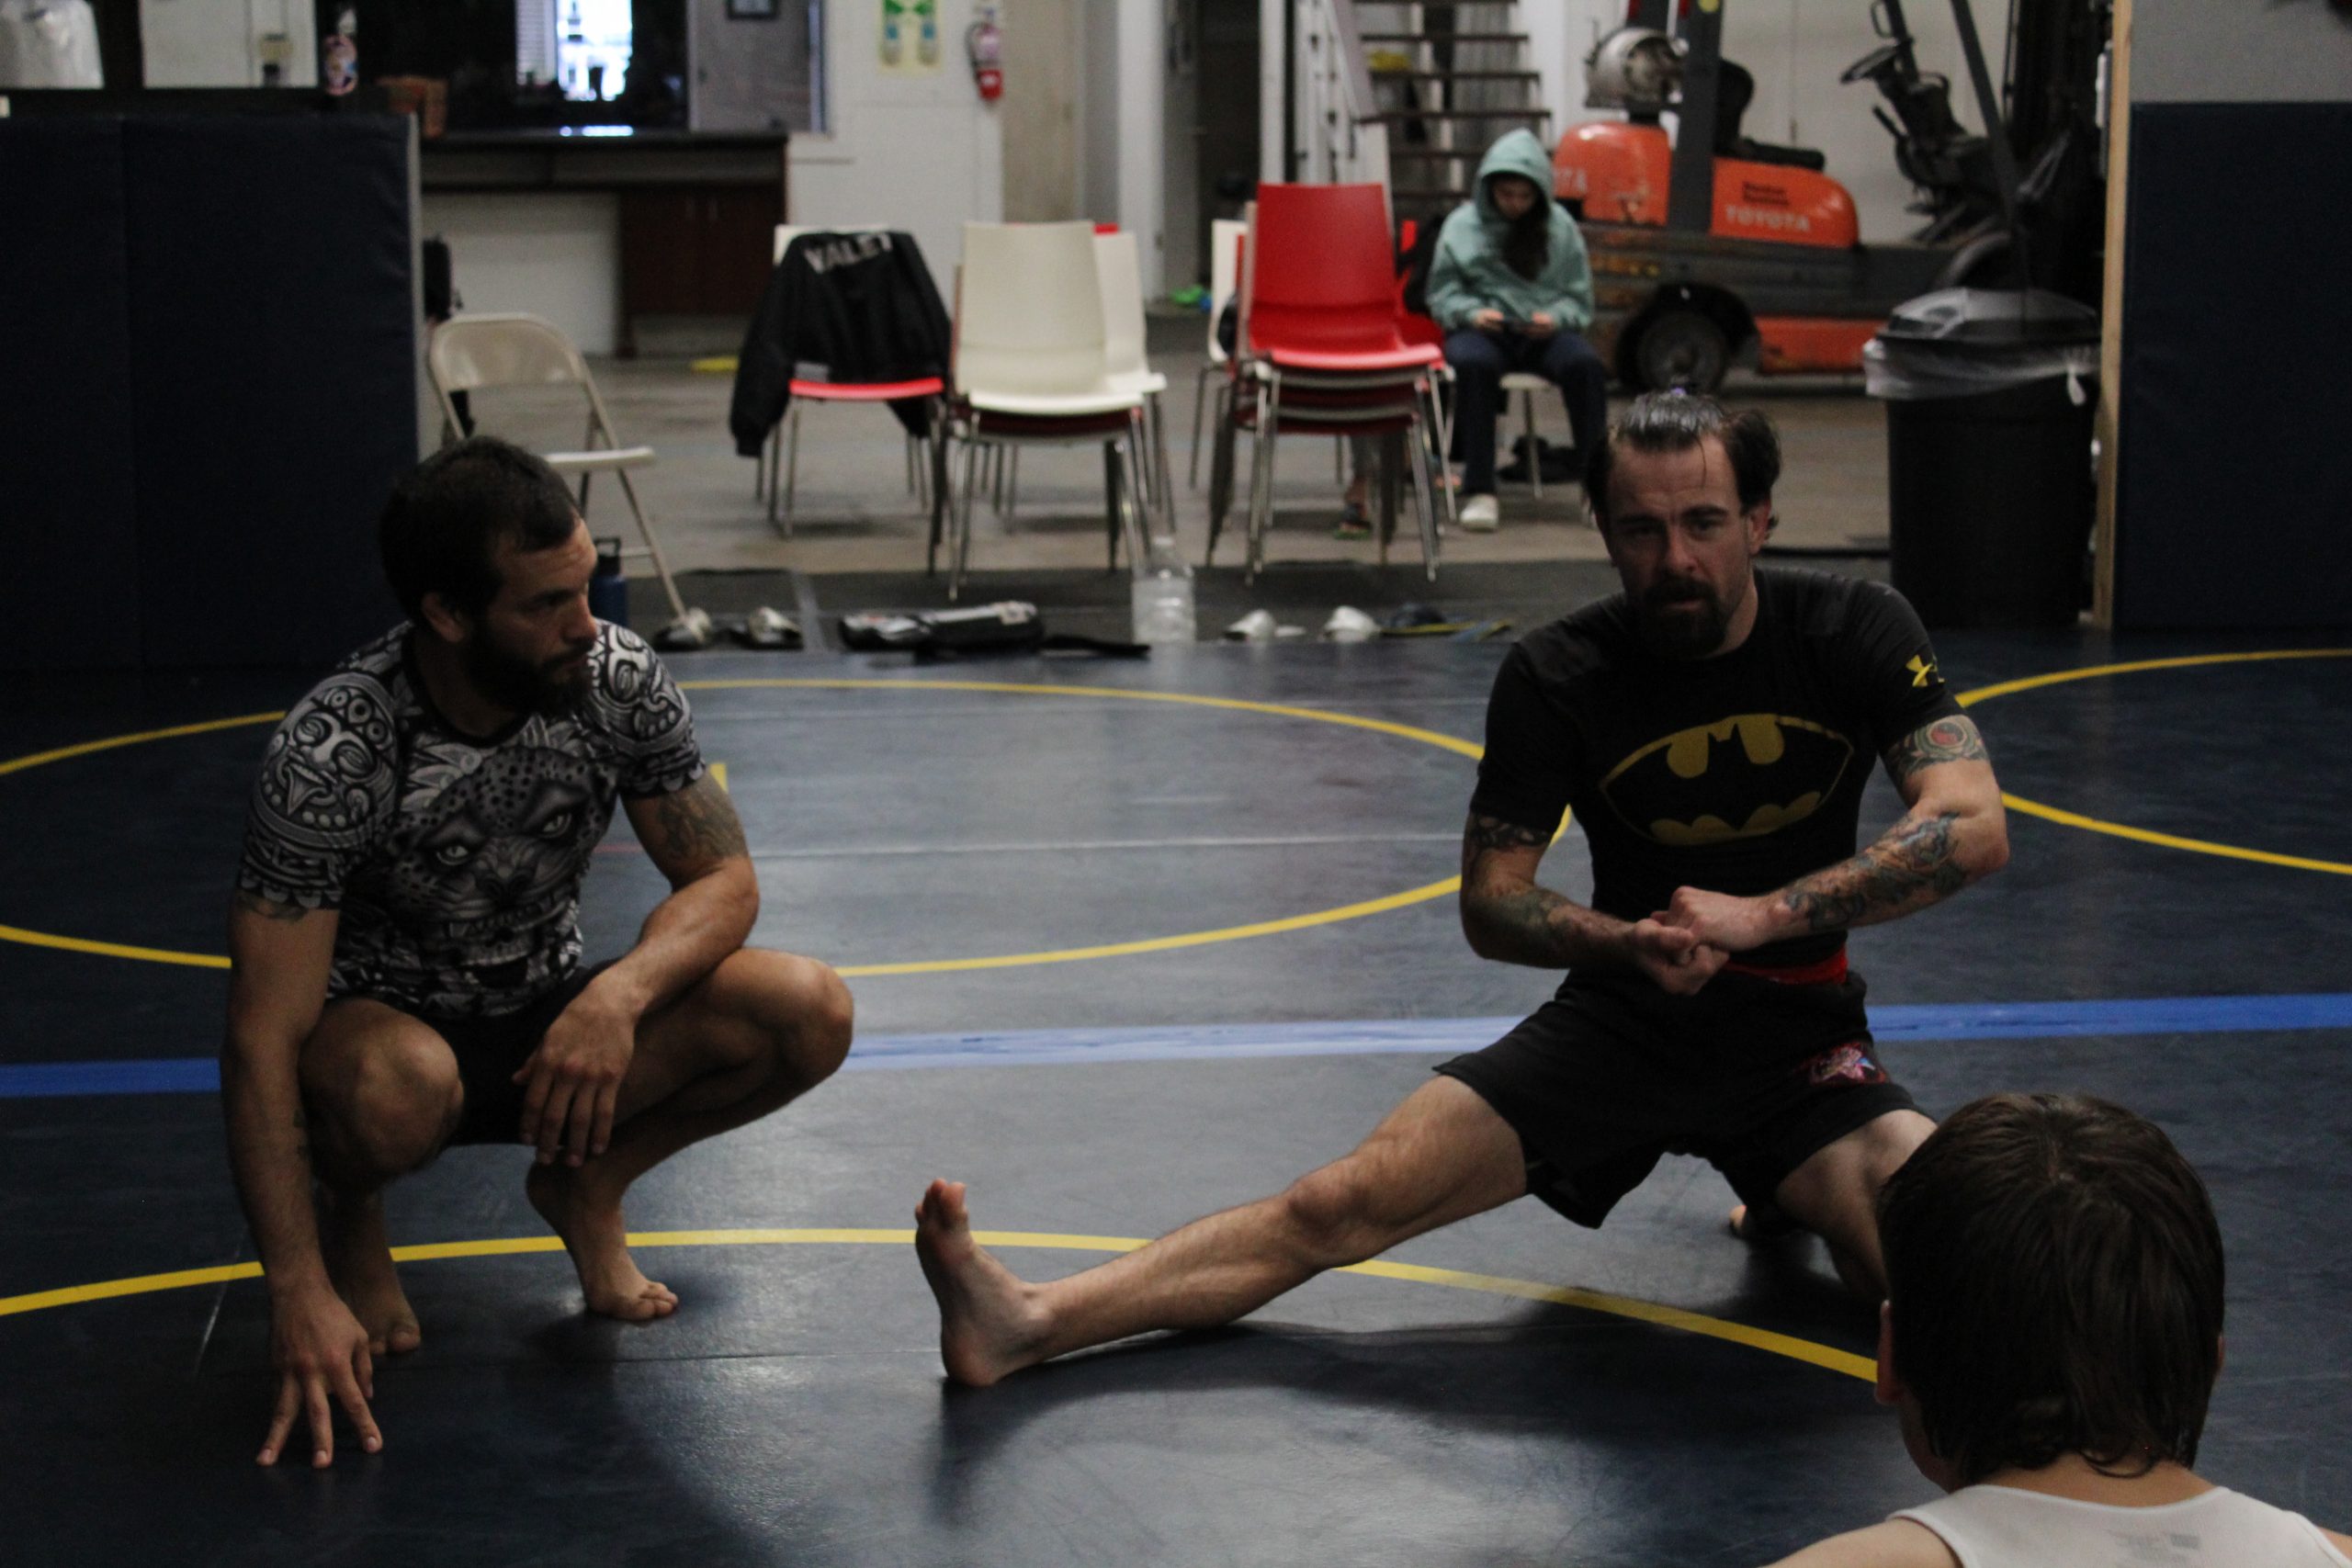 DMC student helps train others at local MMA gym